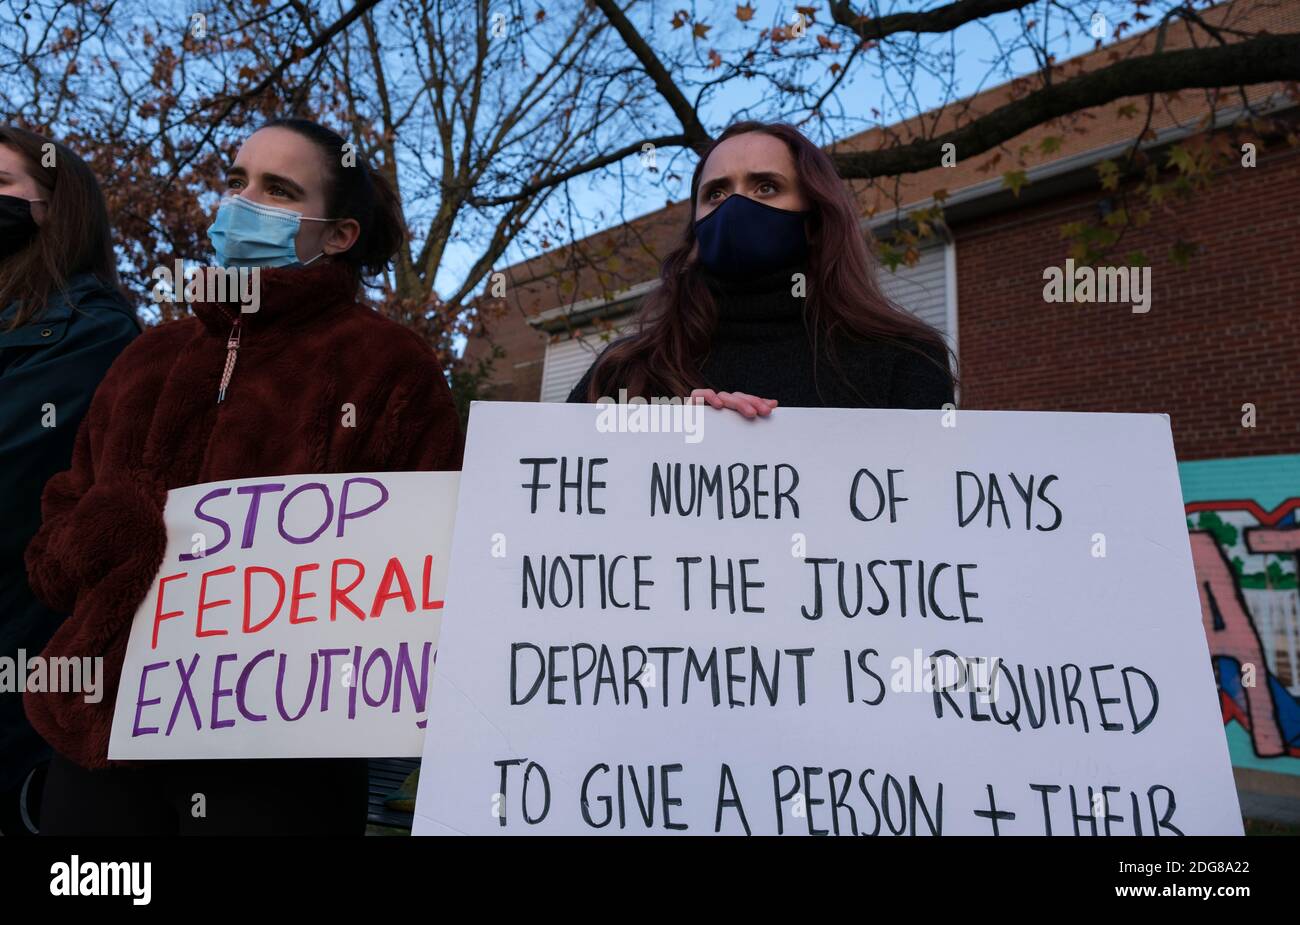 College students and community members wearing face masks hold placards while gathering in Peoples Park to protest against the death penalty, and a wave of executions at the Terre Haute federal prison (Federal Correctional Complex at Terre Haute) during the last months of Donald J. Trump's presidency. The federal government has already executed 8 prisoners on death row, and several more are scheduled to be put to death before January 20th. Billie Allen, who maintains his innocence, but is on death row, spoke to the group via a phone call from prison. Stock Photo